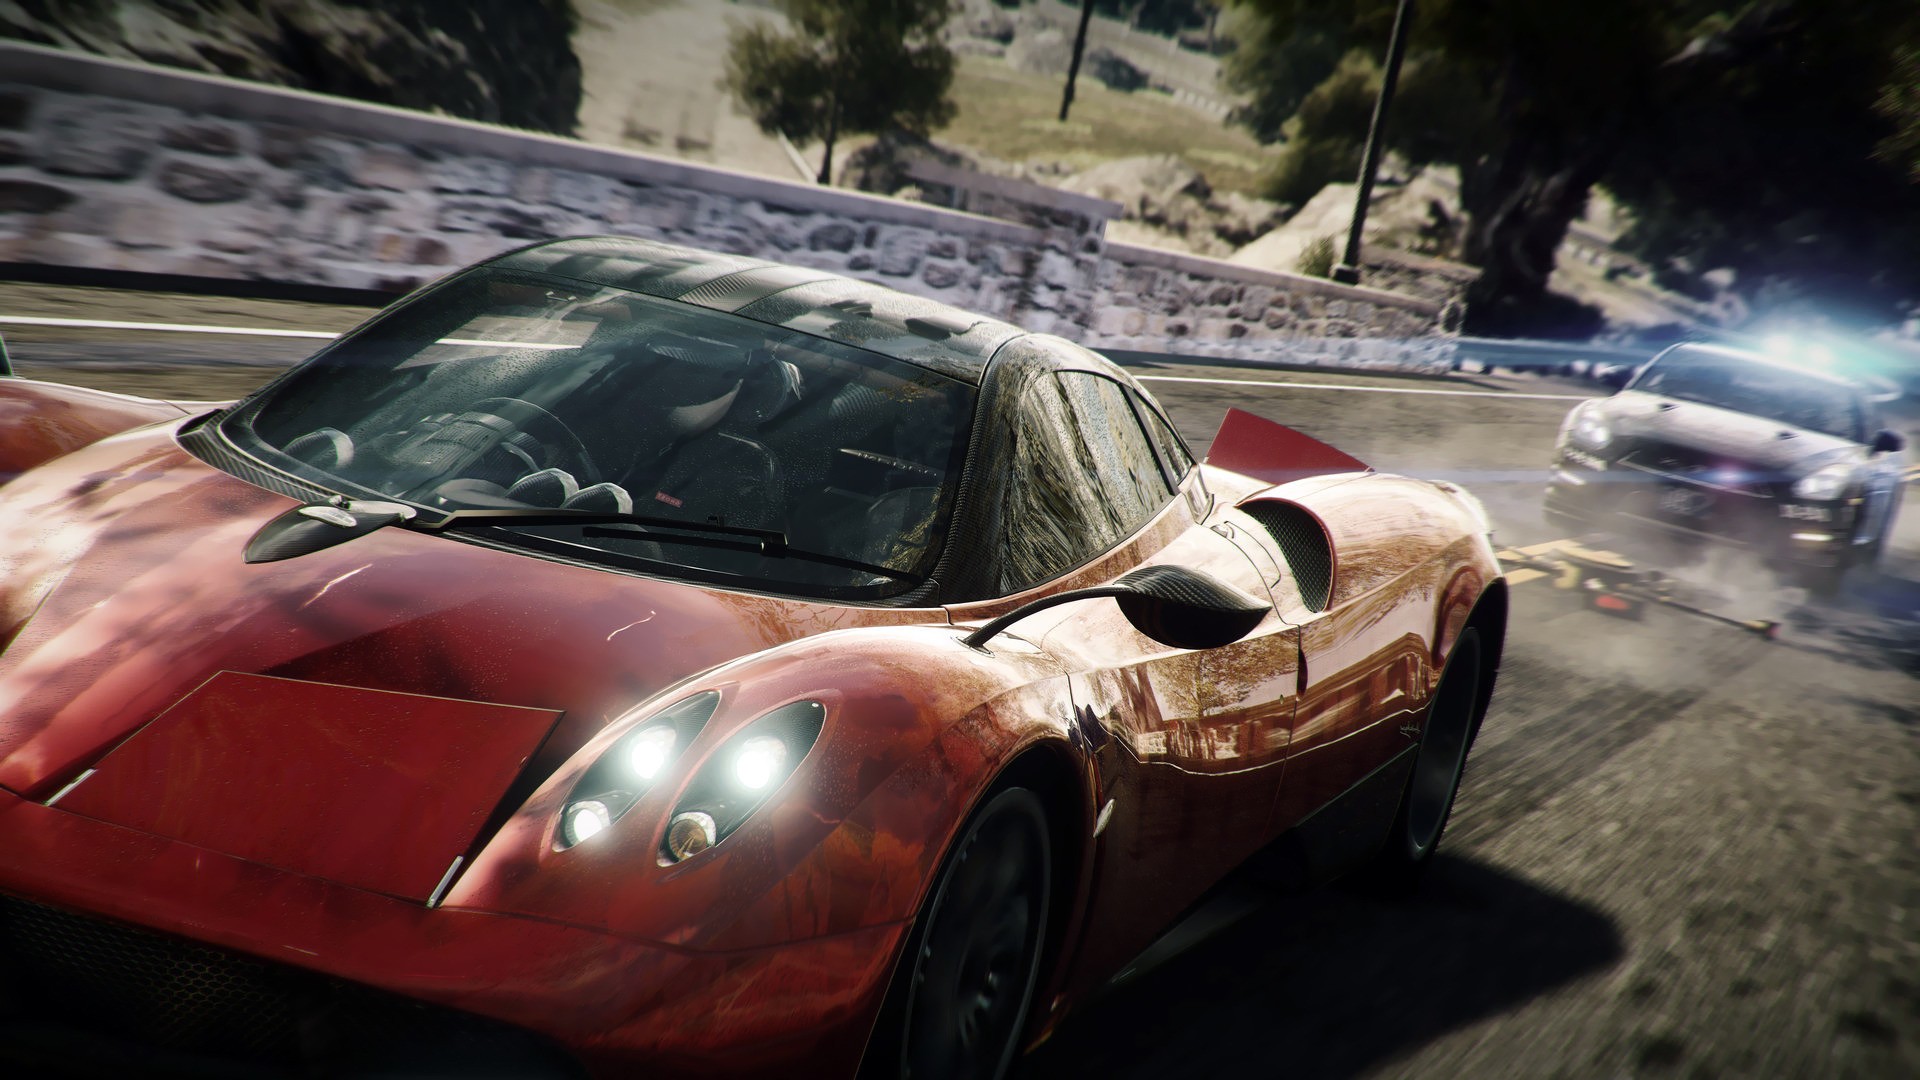 How To Download Need For Speed Rivals For Free 